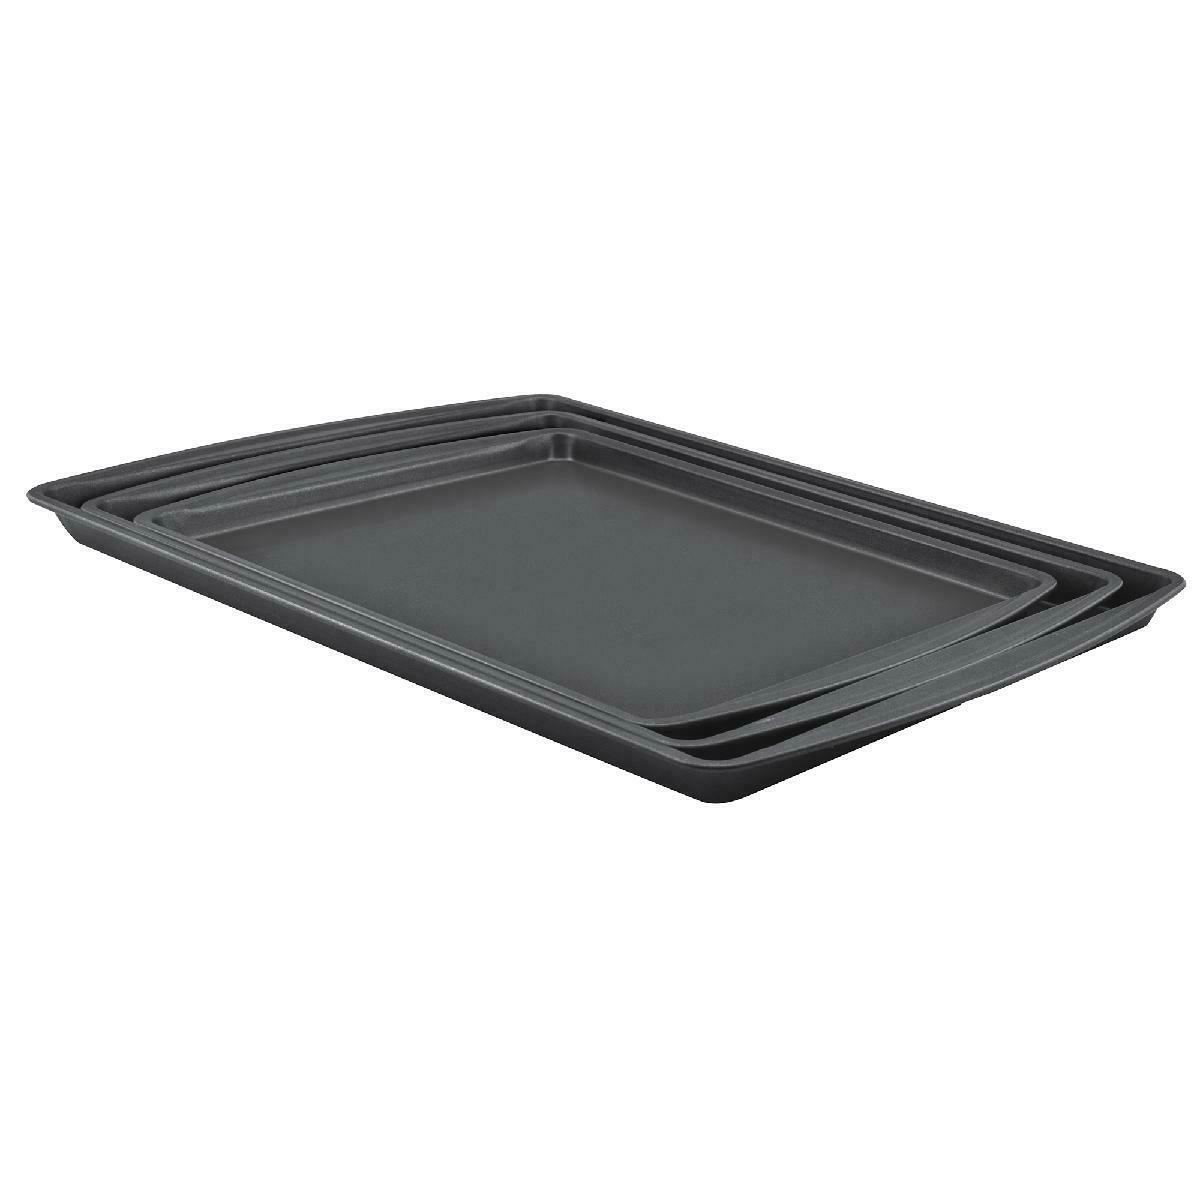 Mainstays Nonstick Cookie Sheet Set, 3 Piece Small, Medium and Large Cookie Shee